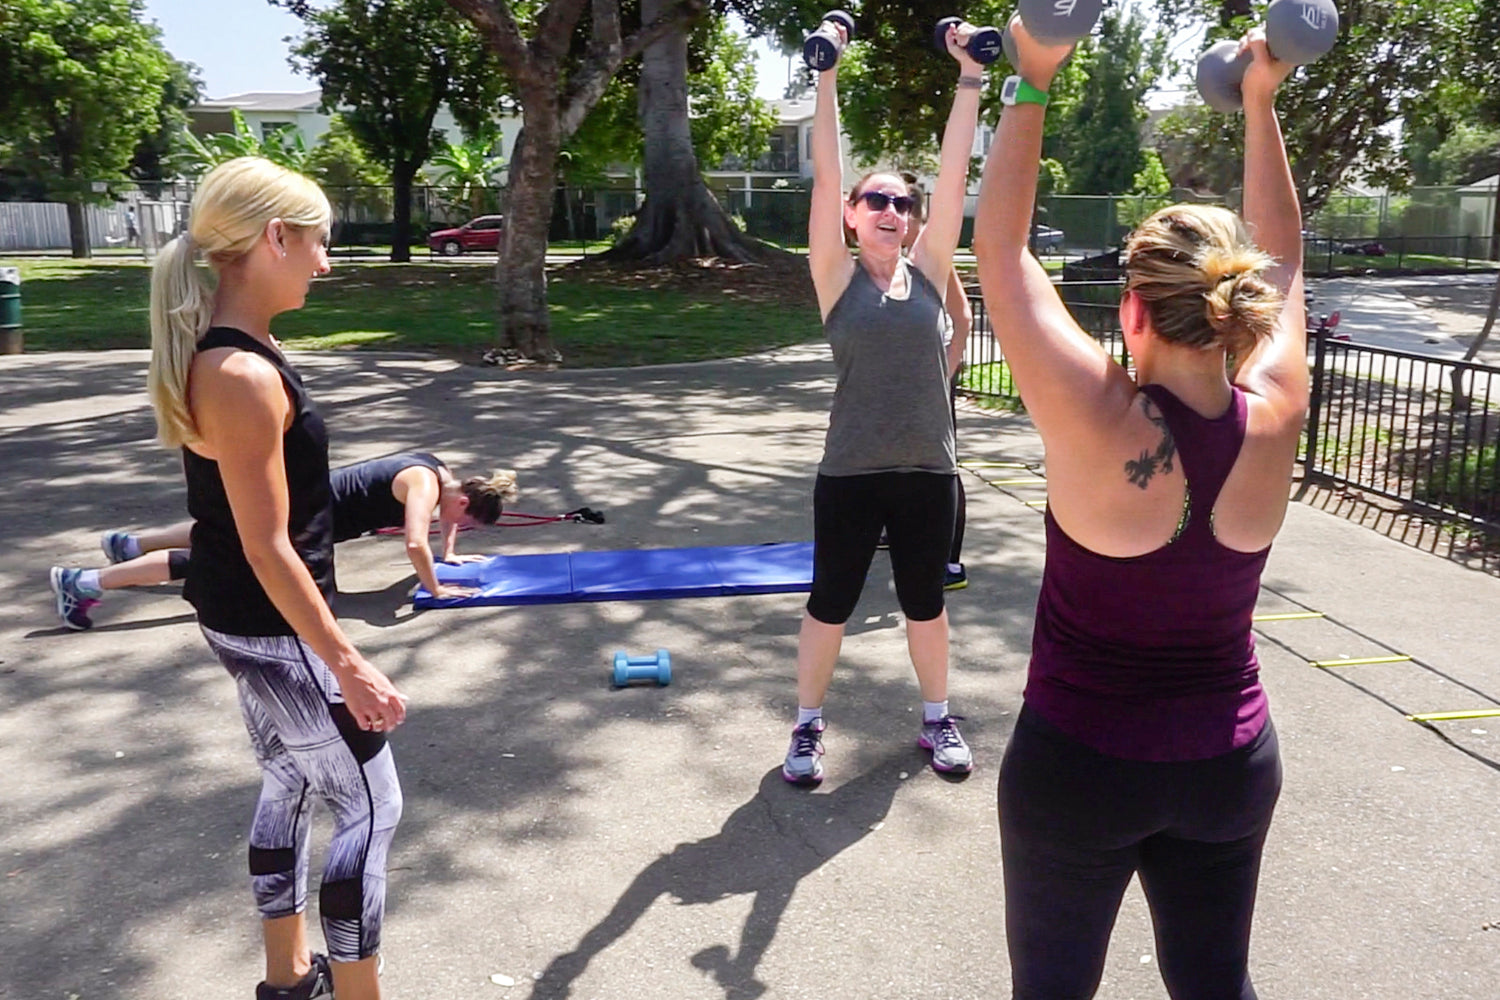 Bridesmaids working out together with prosourcefit products